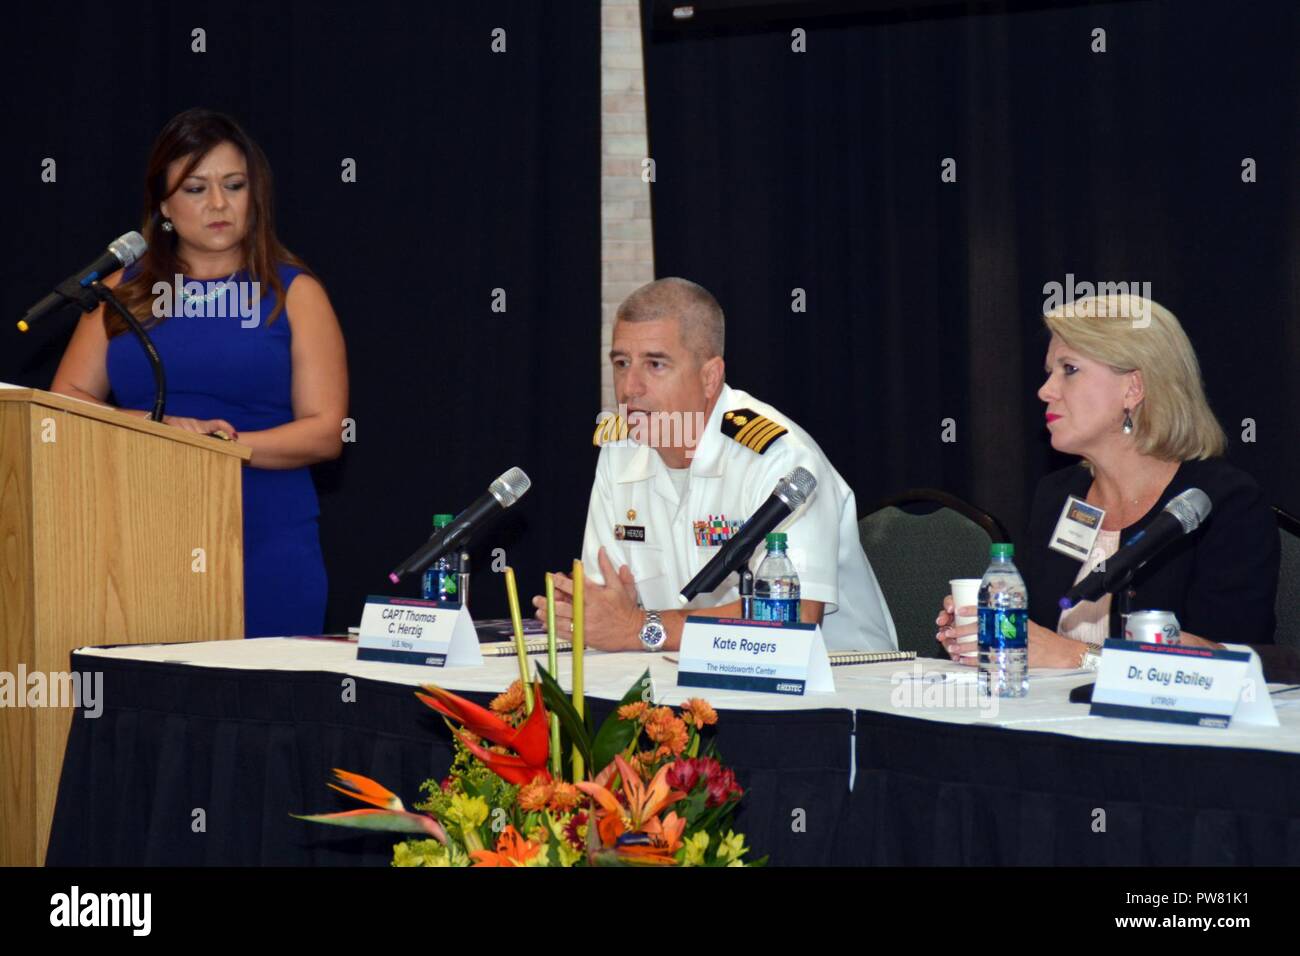 EDINBURG, Texas (Oct. 2, 2017) Houston native, Capt. Thomas Herzig, commanding officer, Naval Medical Research Unit San Antonio, speaks on the importance of science, technology, engineering and mathematics (STEM) within the Navy during the 2017 Hispanic Engineering, Science and Technology Week’s (HESTEC) STEM Literacy Panel held on the campus of the University of Texas-Rio Grande Valley.  HESTEC is a nationally recognized model for promoting STEM careers to students of all ages.  Now in its 16th year, the program has been recognized as a “Bright Spot in Hispanic Education” by the White House I Stock Photo